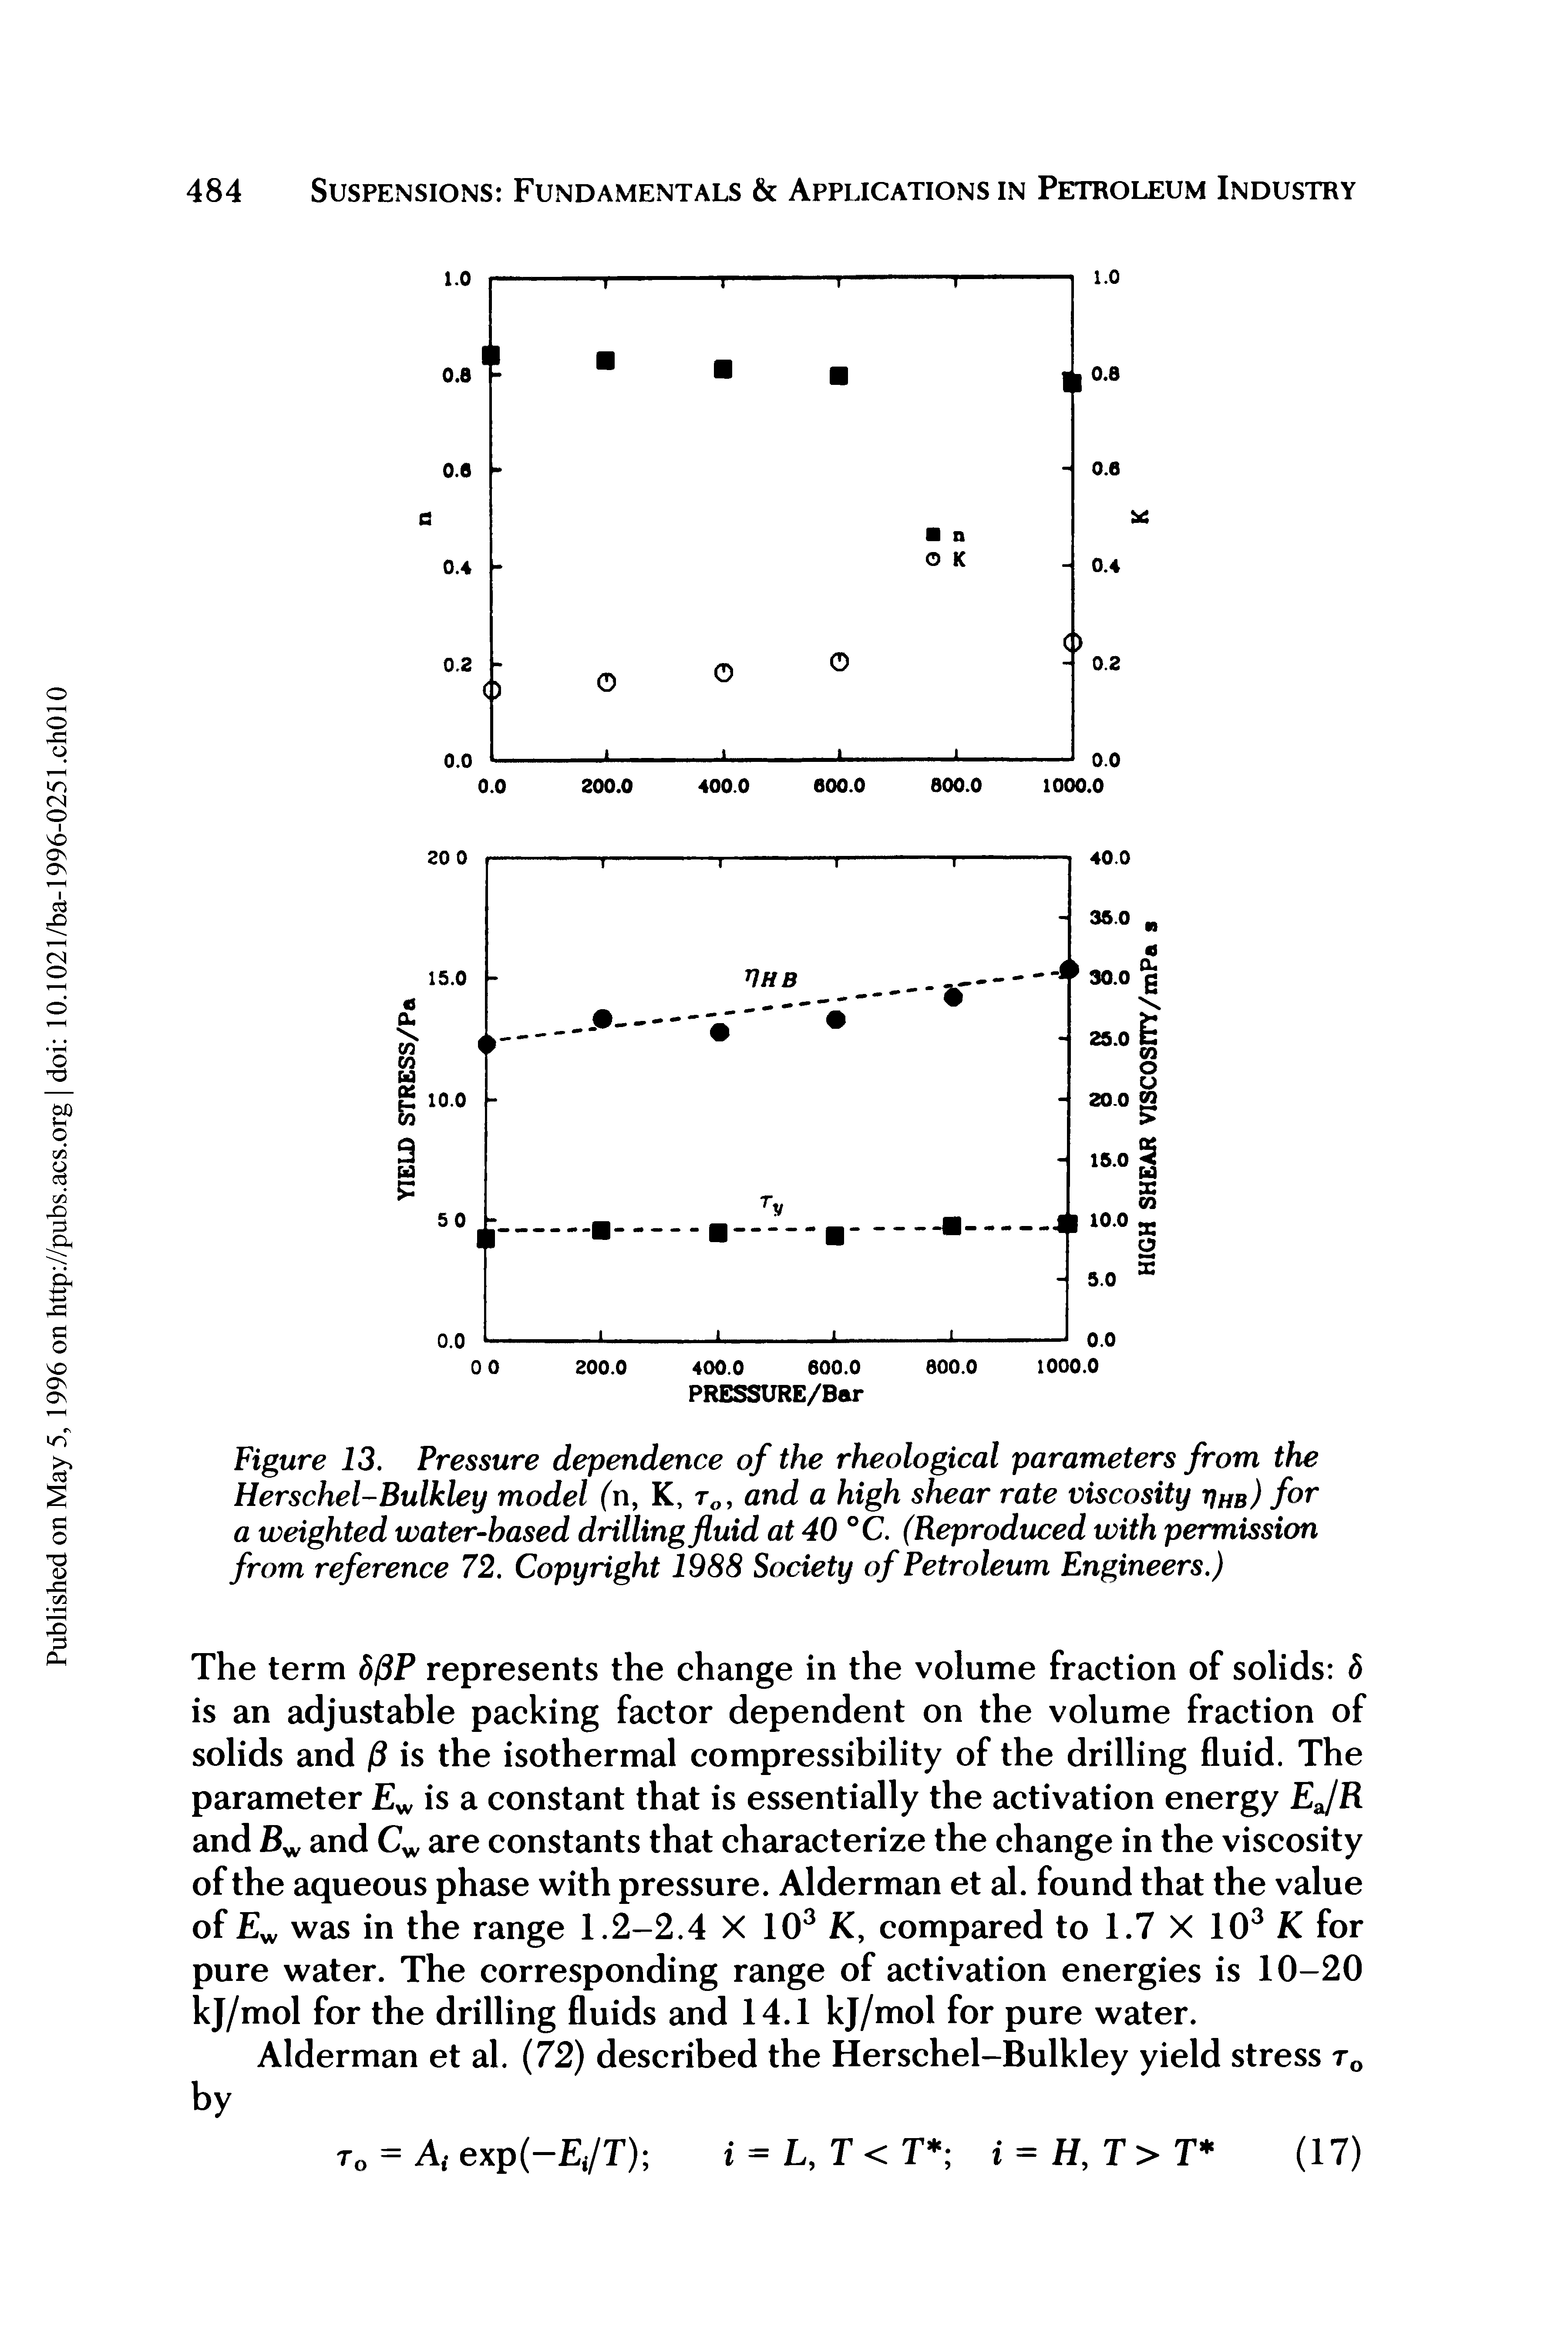 Figure 13. Pressure dependence of the rheological parameters from the Herschel-Bulkley model (n, K, r0, and a high shear rate viscosity tjhb) for a weighted water-based drilling fluid at 40 °C. (Reproduced with permission from reference 72. Copyright 1988 Society of Petroleum Engineers.)...